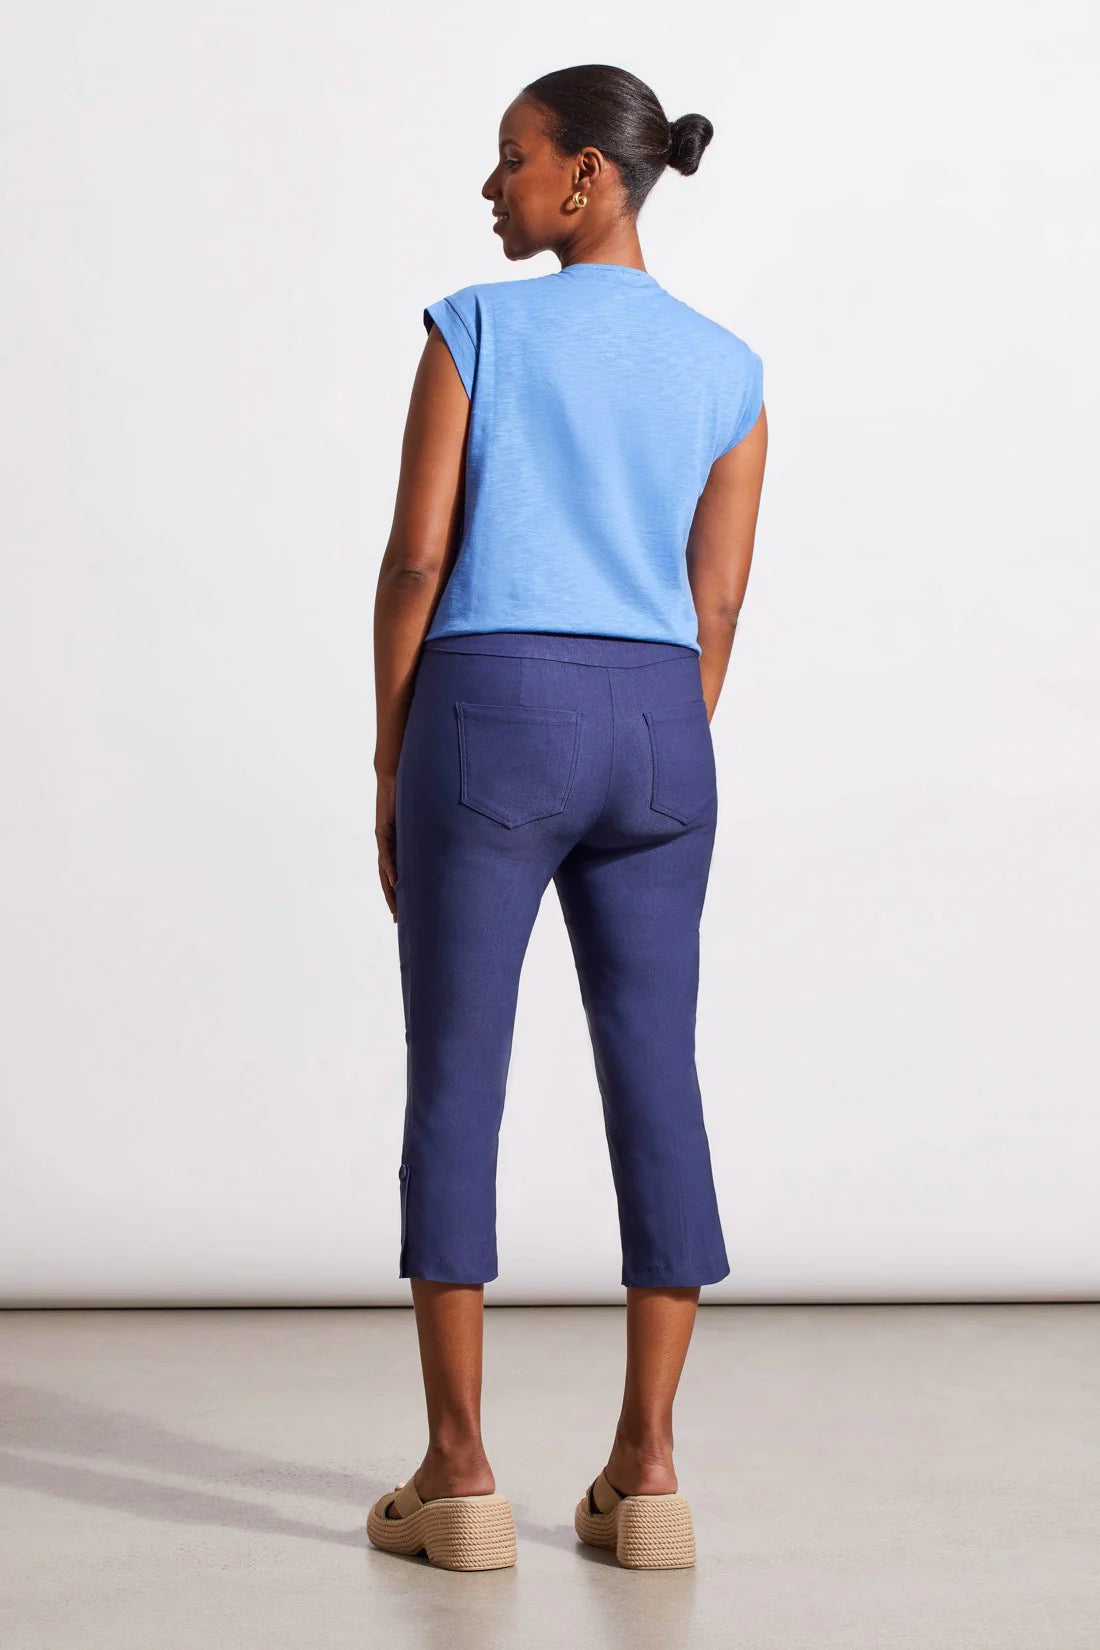 Rocking a 22" inseam and a hem with side vents, these capris are ideal for warm-weather days when breathability is a must. We love the straight leg fit, stretch twill fabric, functional slip pockets in the front, and patch pockets in the back.